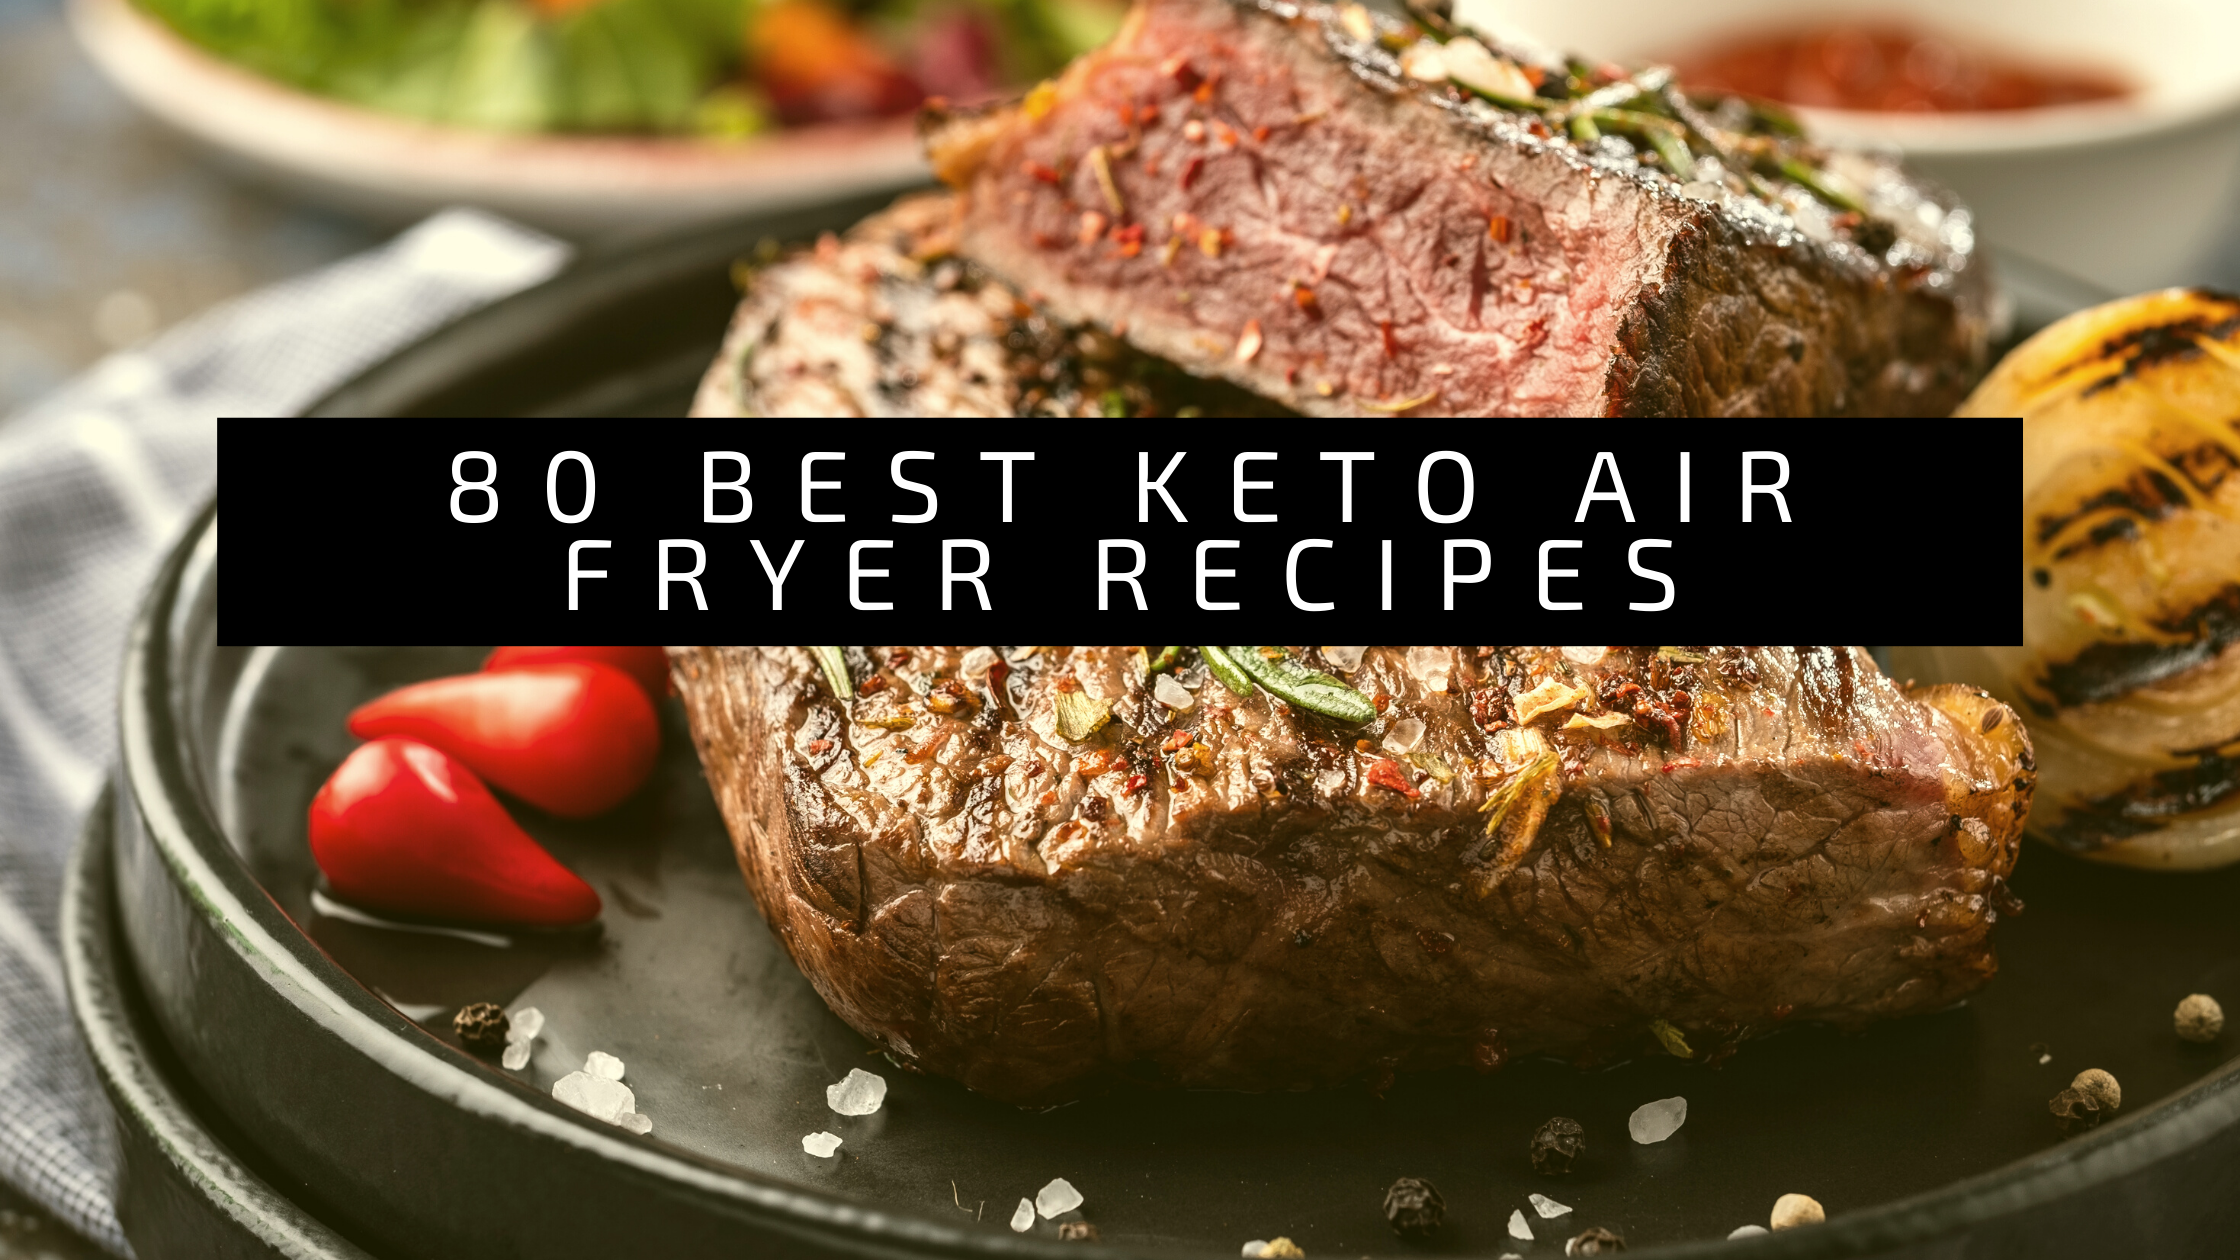 40 Family-Friendly Keto Air Fryer Recipes for Quick and Delicious Meals 32